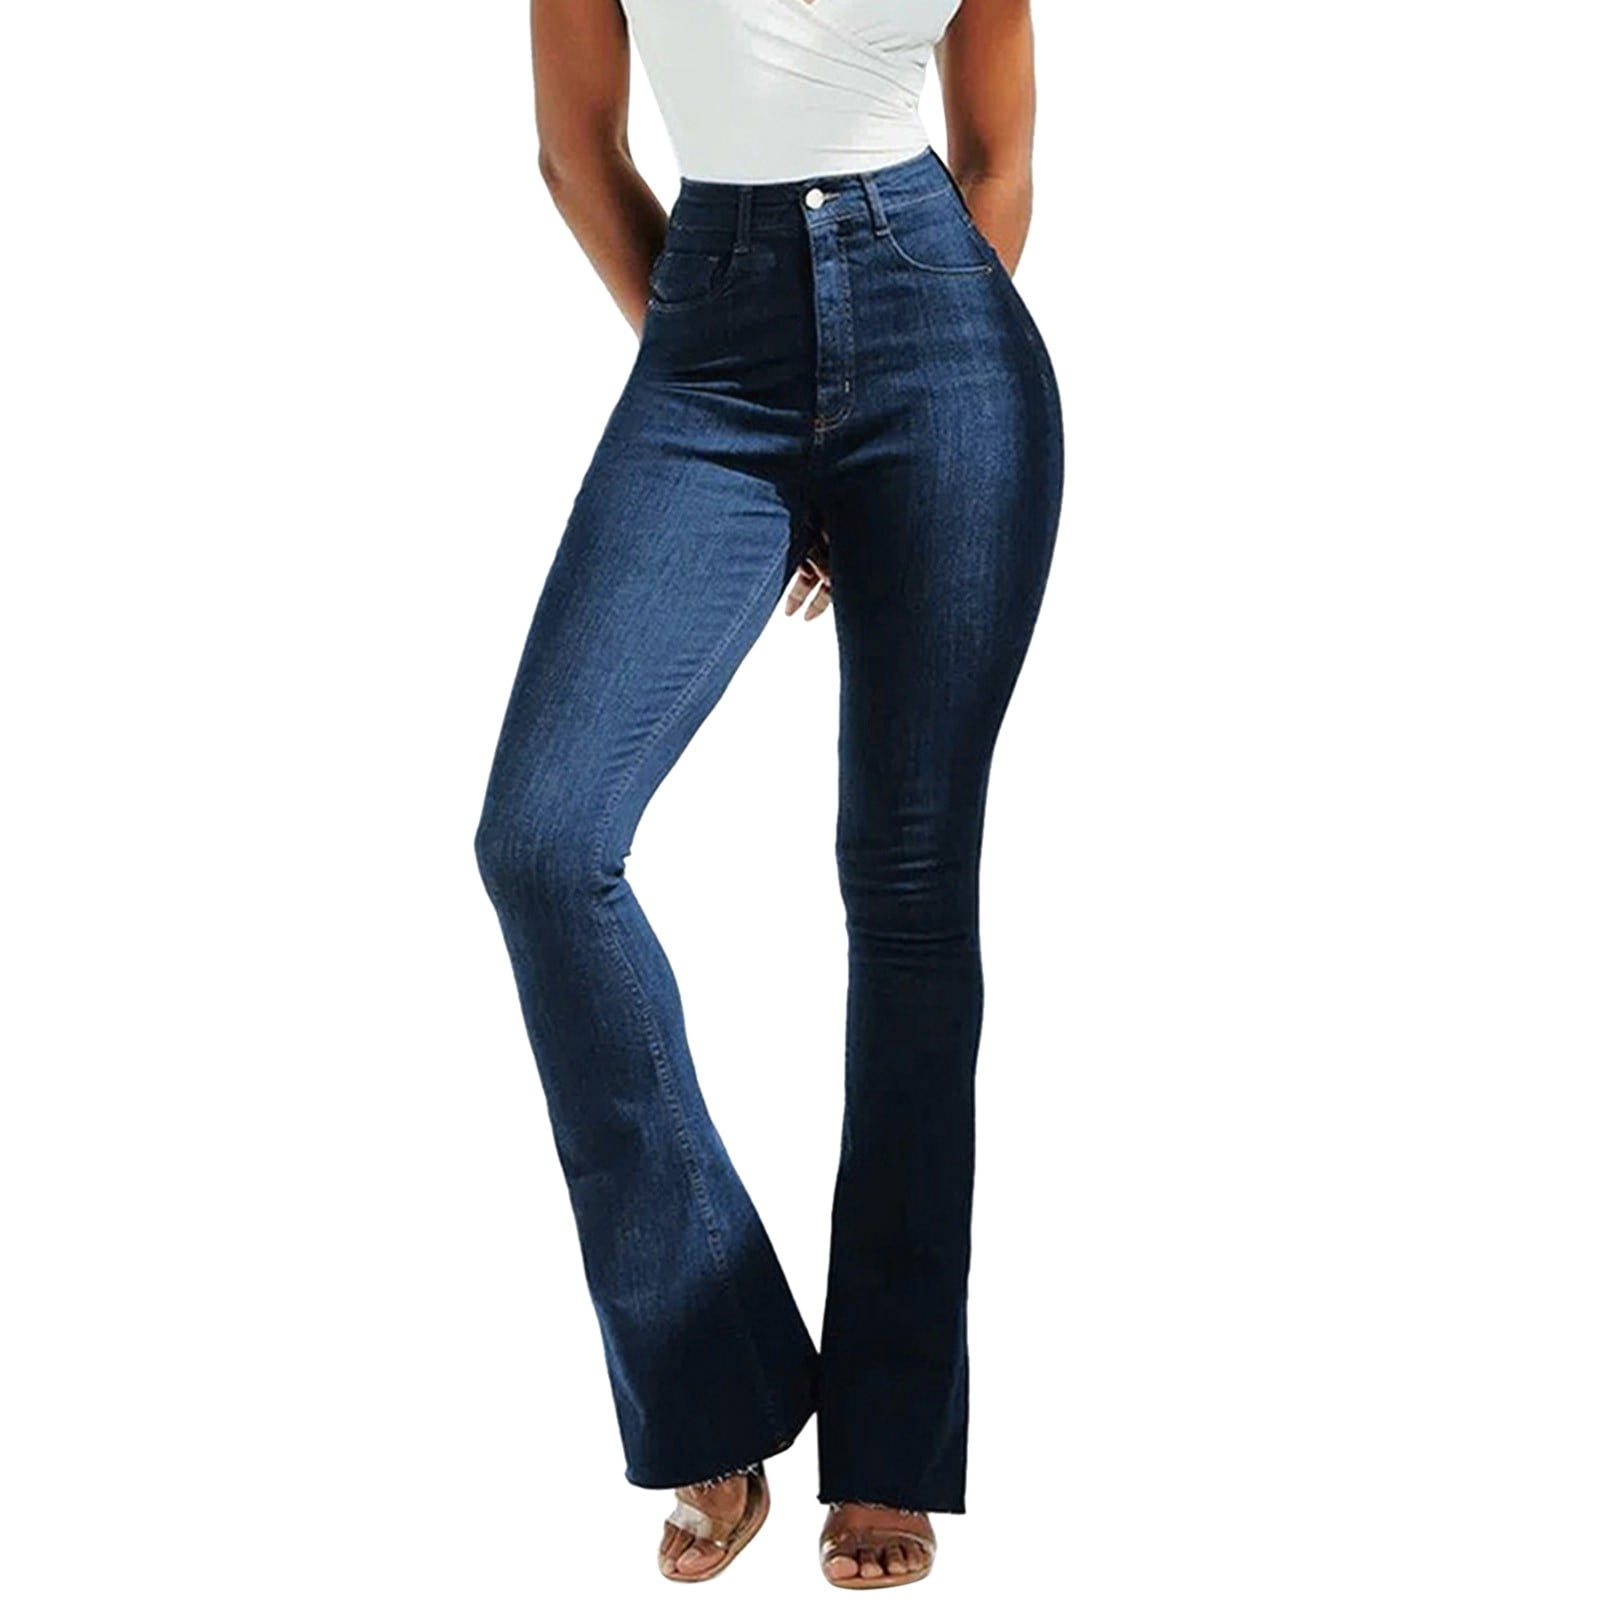 Ketyyh-chn99 Women's Jeans Stretch Button Straight Pants Jeans Ladies ...